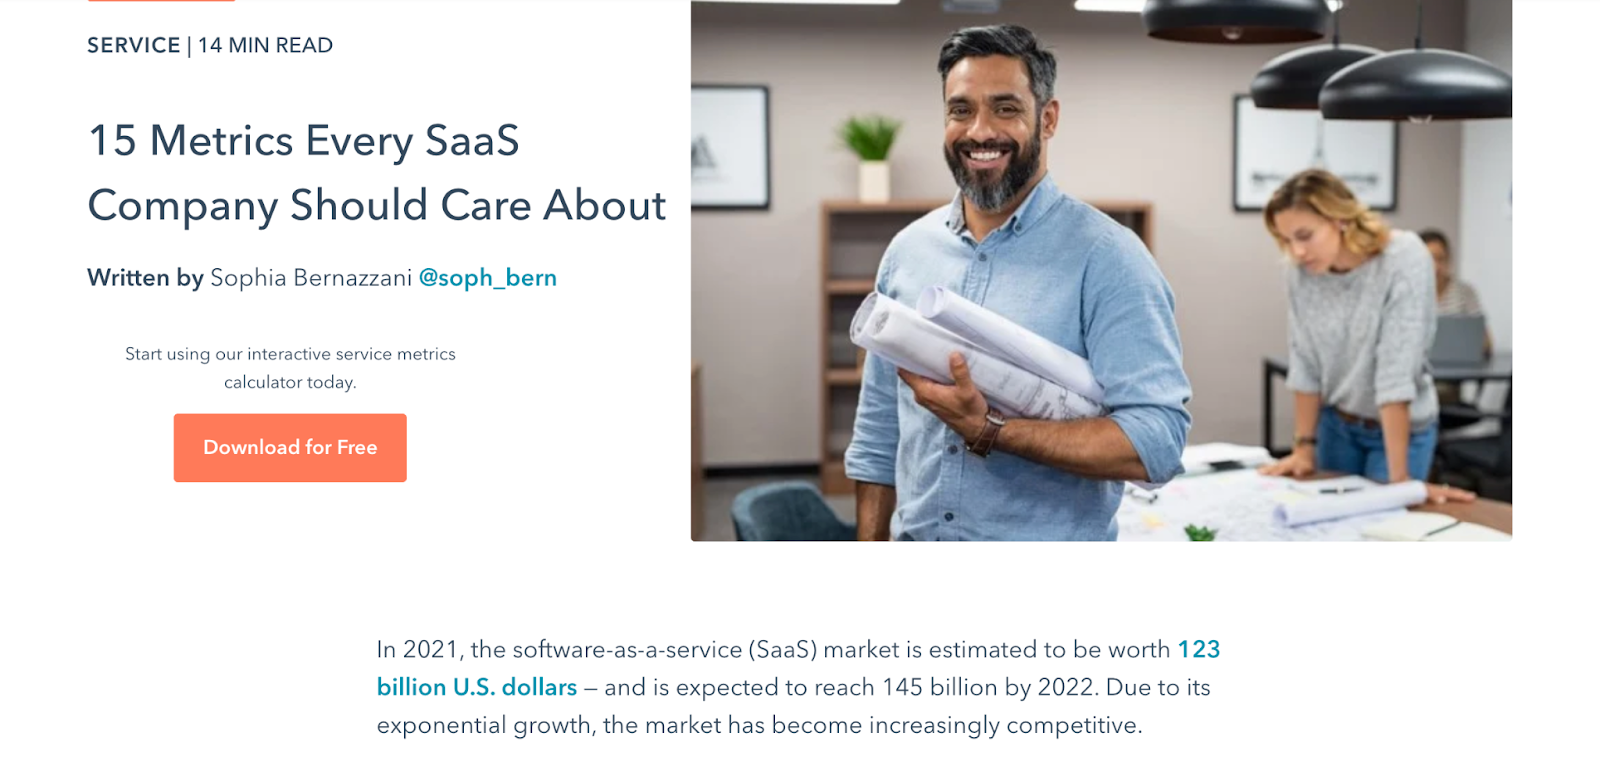 saas metrics to are about 